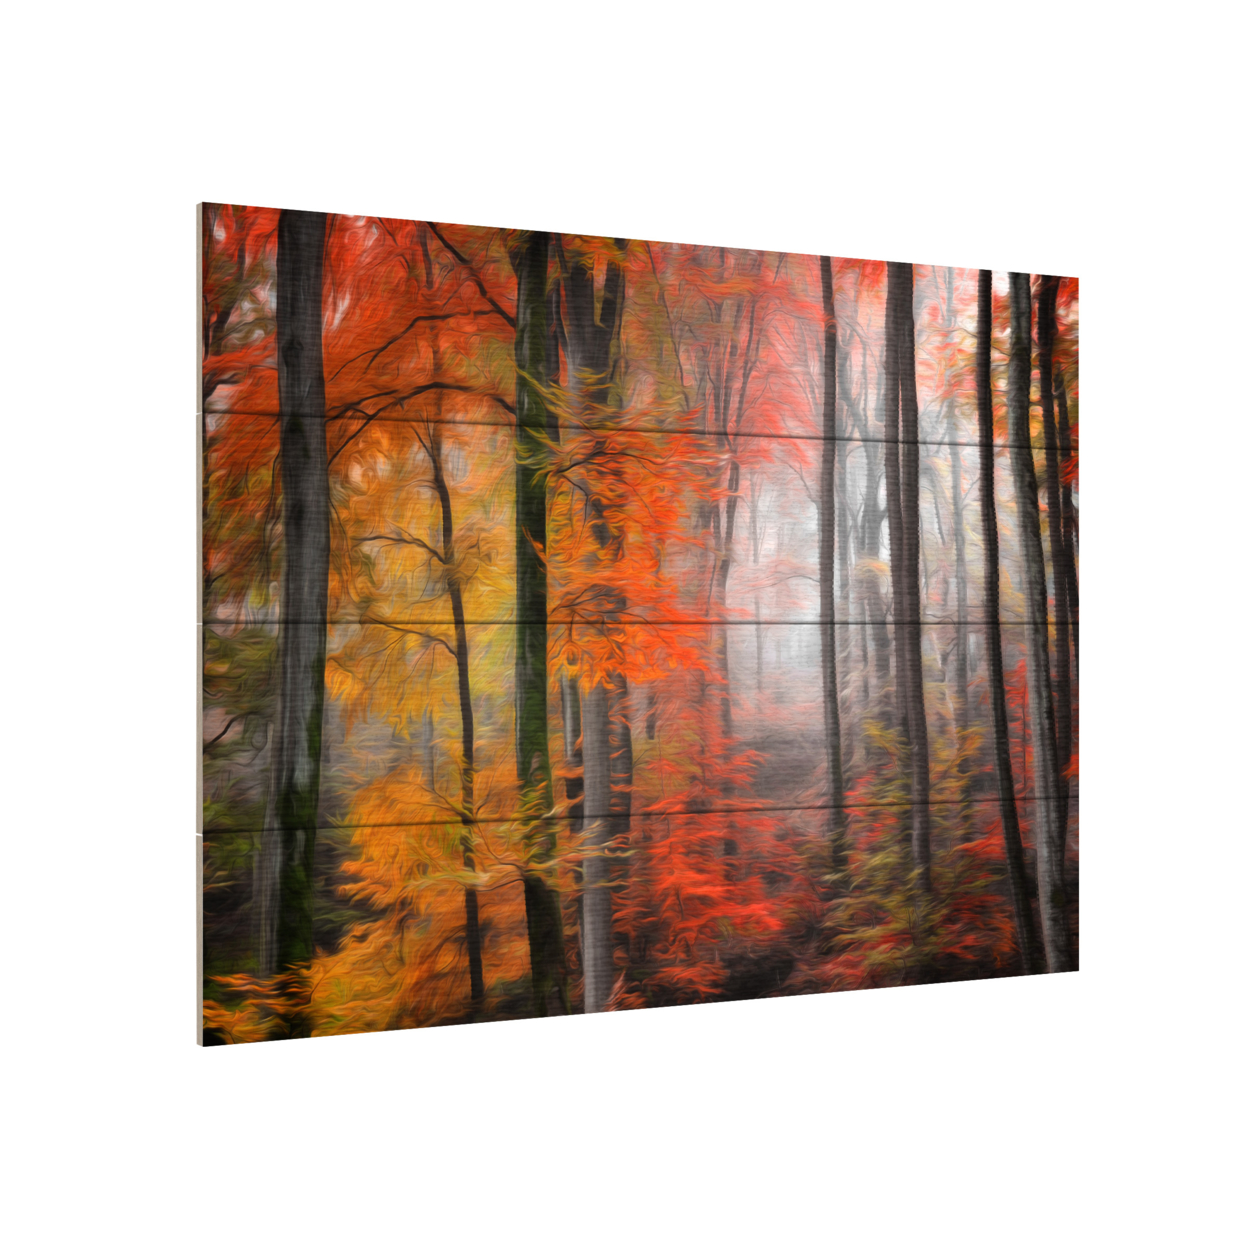 Wall Art 12 X 16 Inches Titled Wildly Red Ready To Hang Printed On Wooden Planks